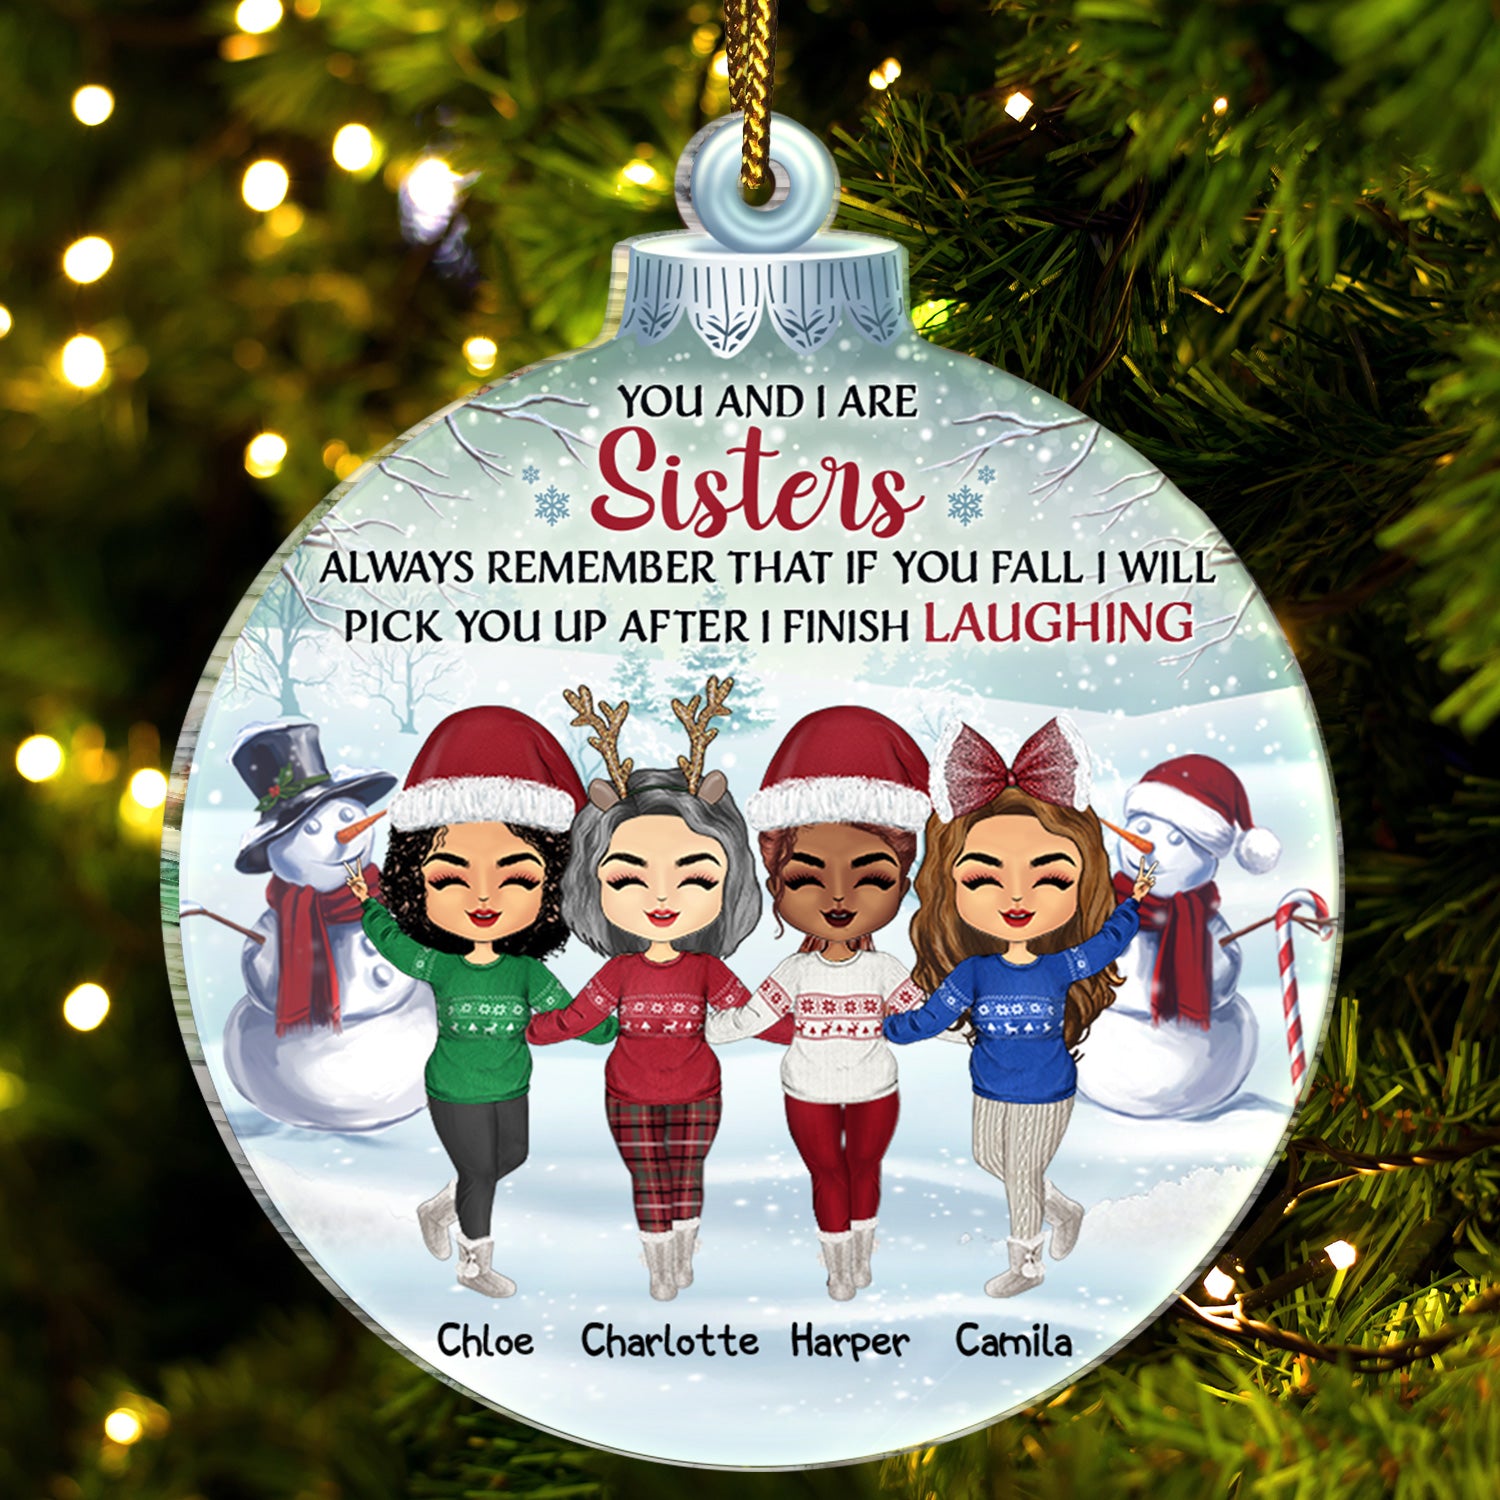 You And I Are Sisters Always Remember That If You Fall - Christmas Gift For Brothers, Siblings, Besties, Best Friends - Personalized Custom Shaped Acrylic Ornament